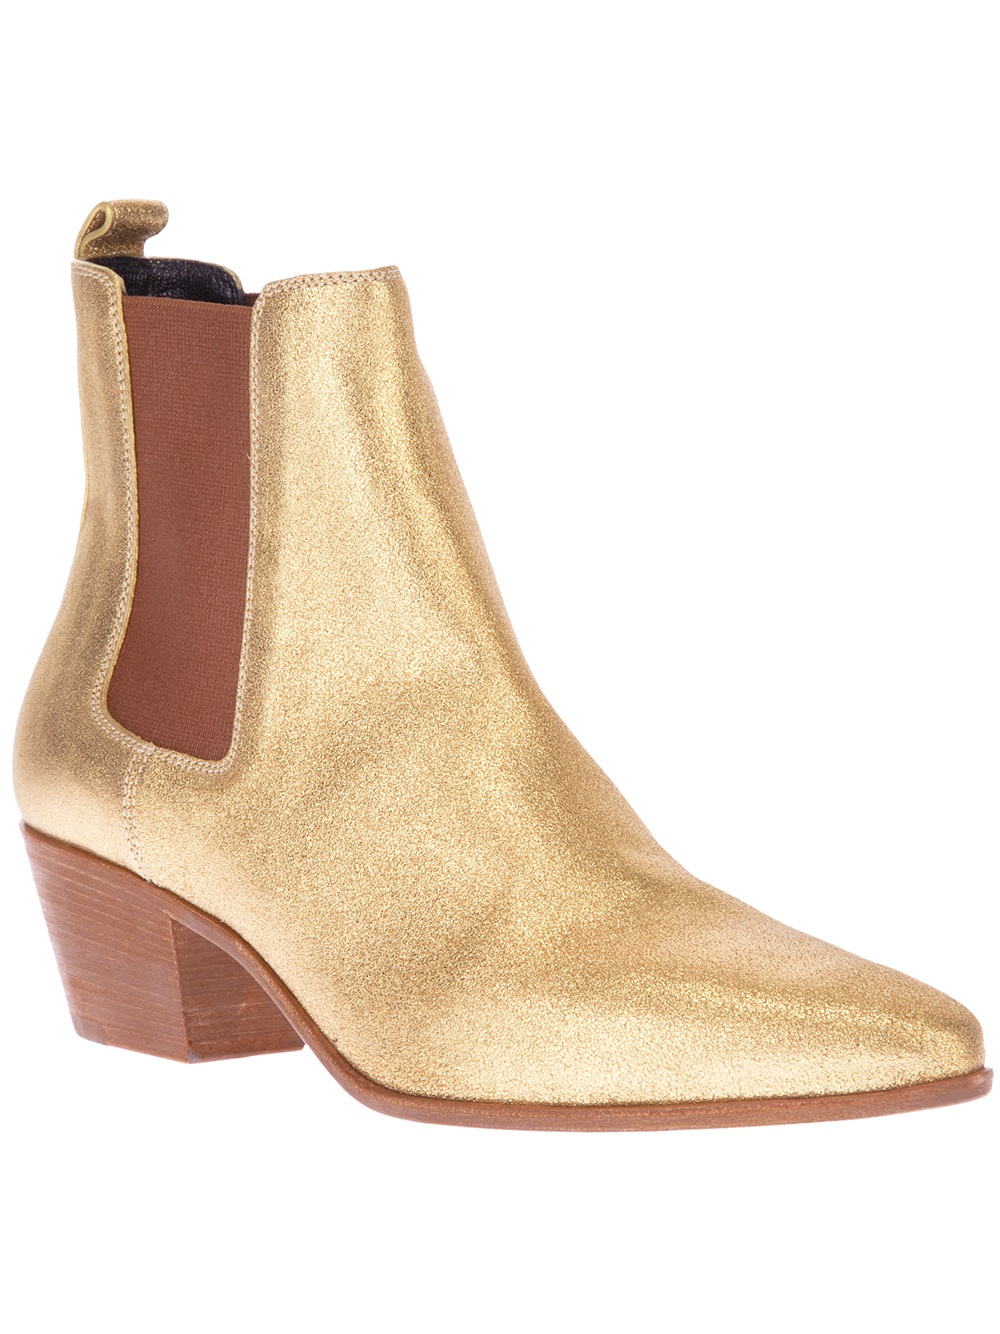 gold ankle boots womens